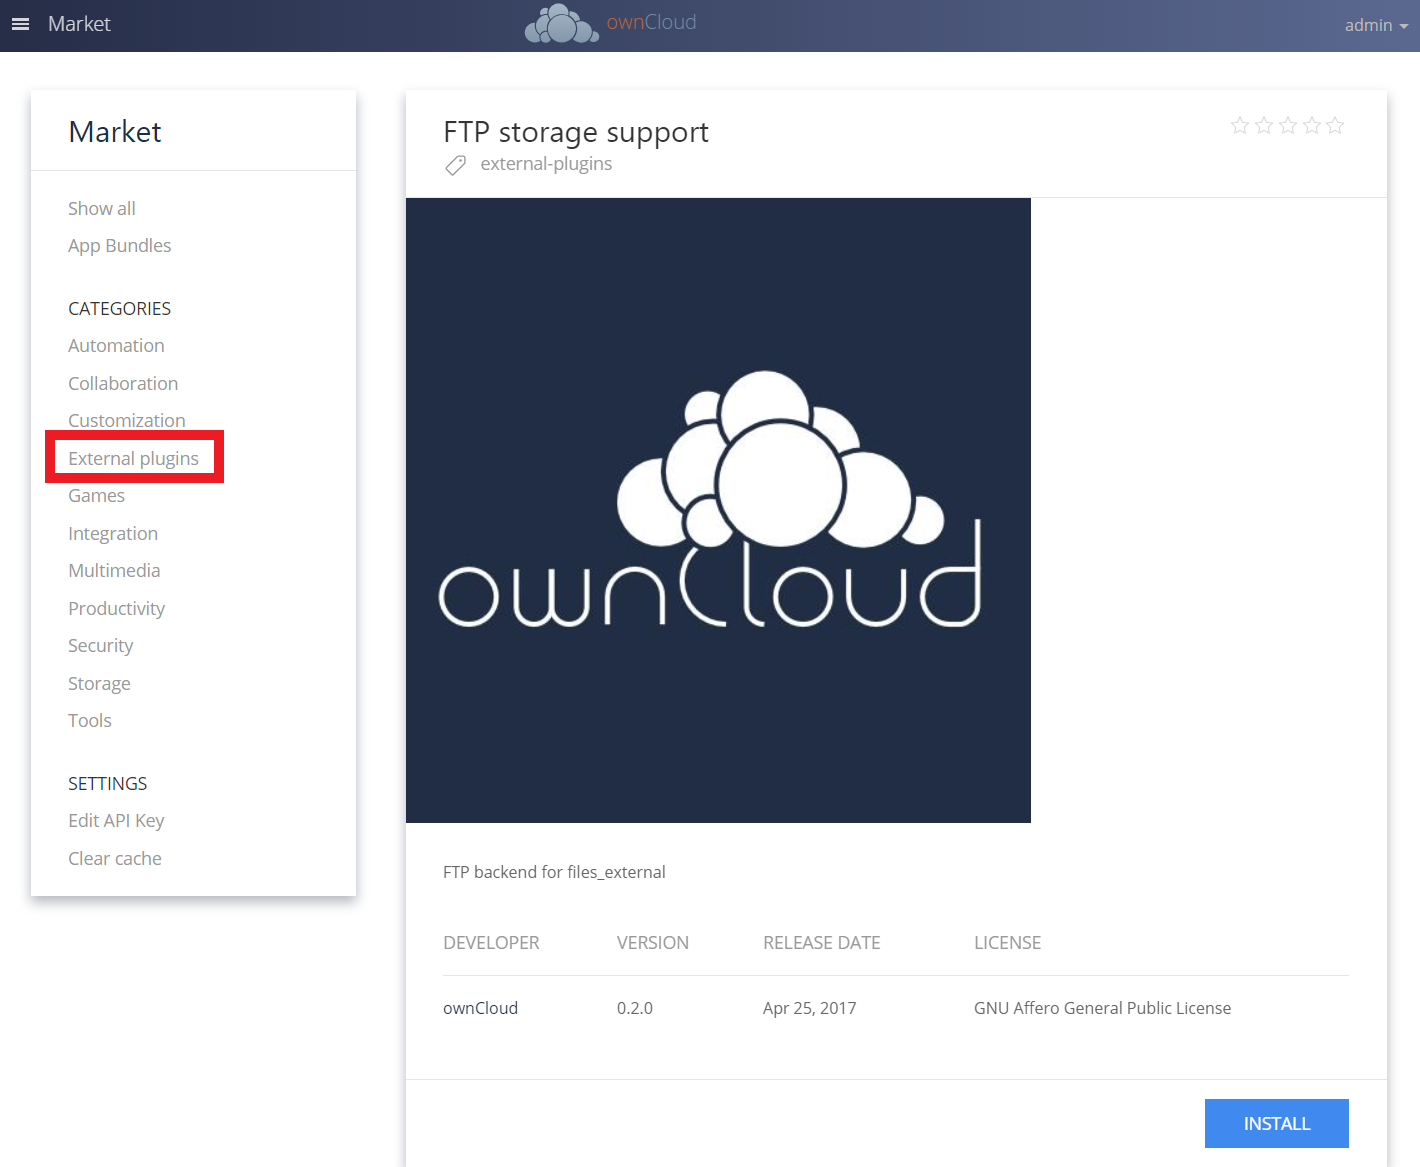 The ownCloud FTP Storage Support App.